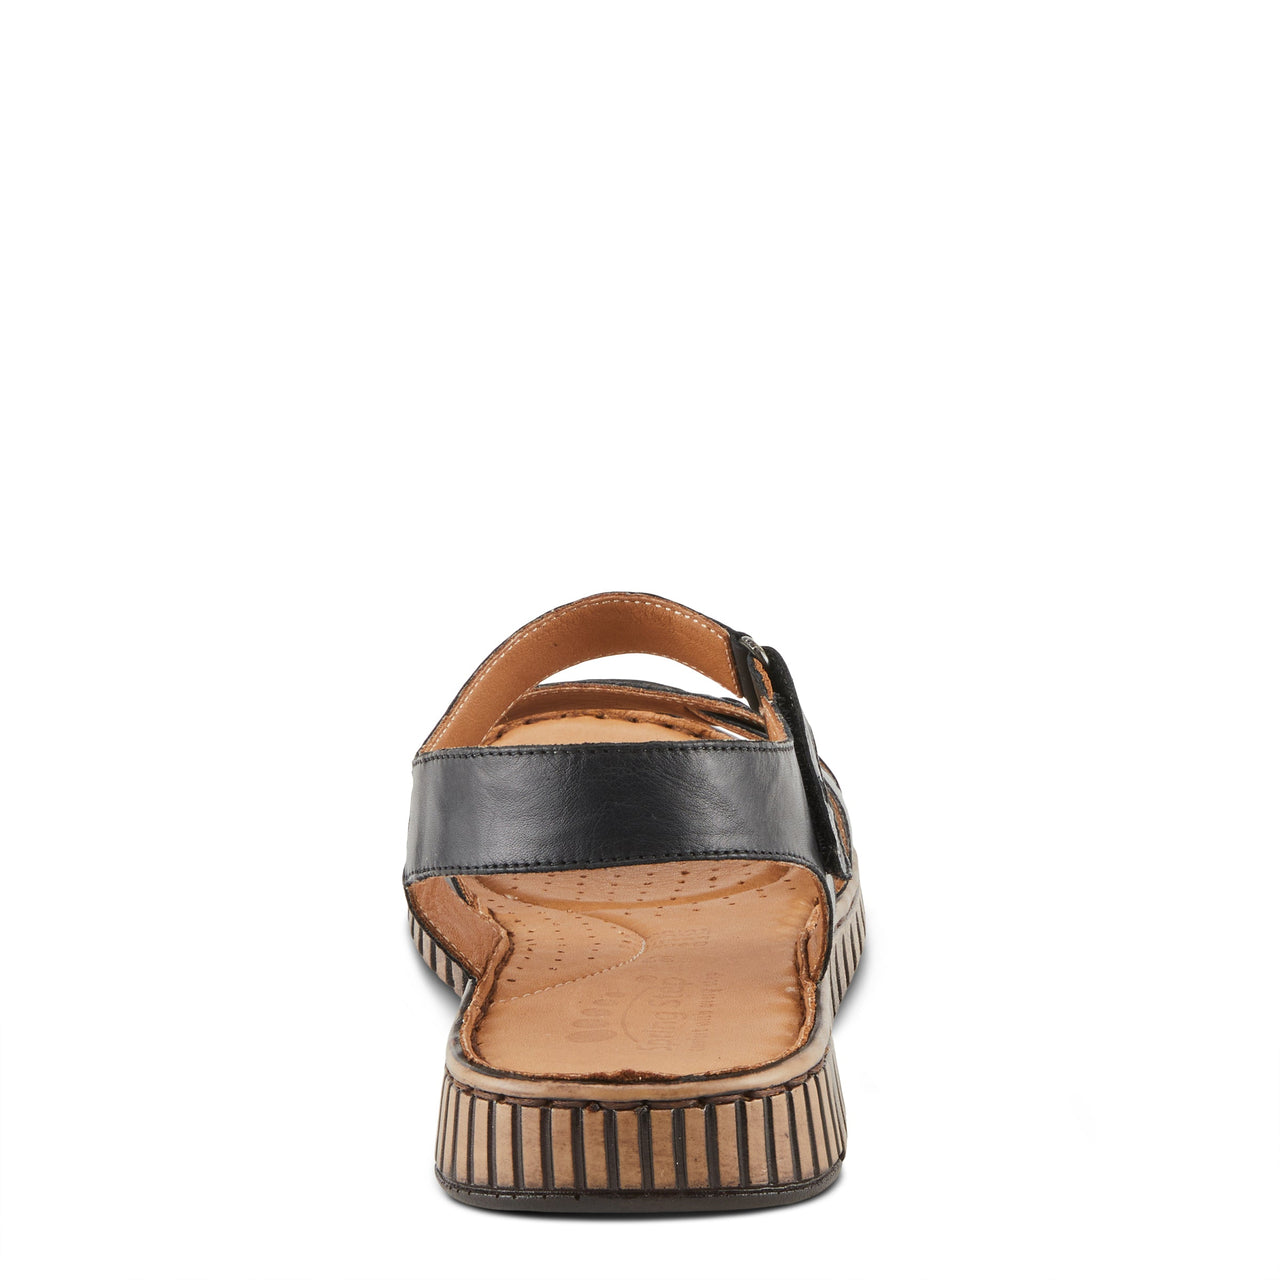 Black leather Spring Step Nochella sandals with adjustable straps and cushioned footbed